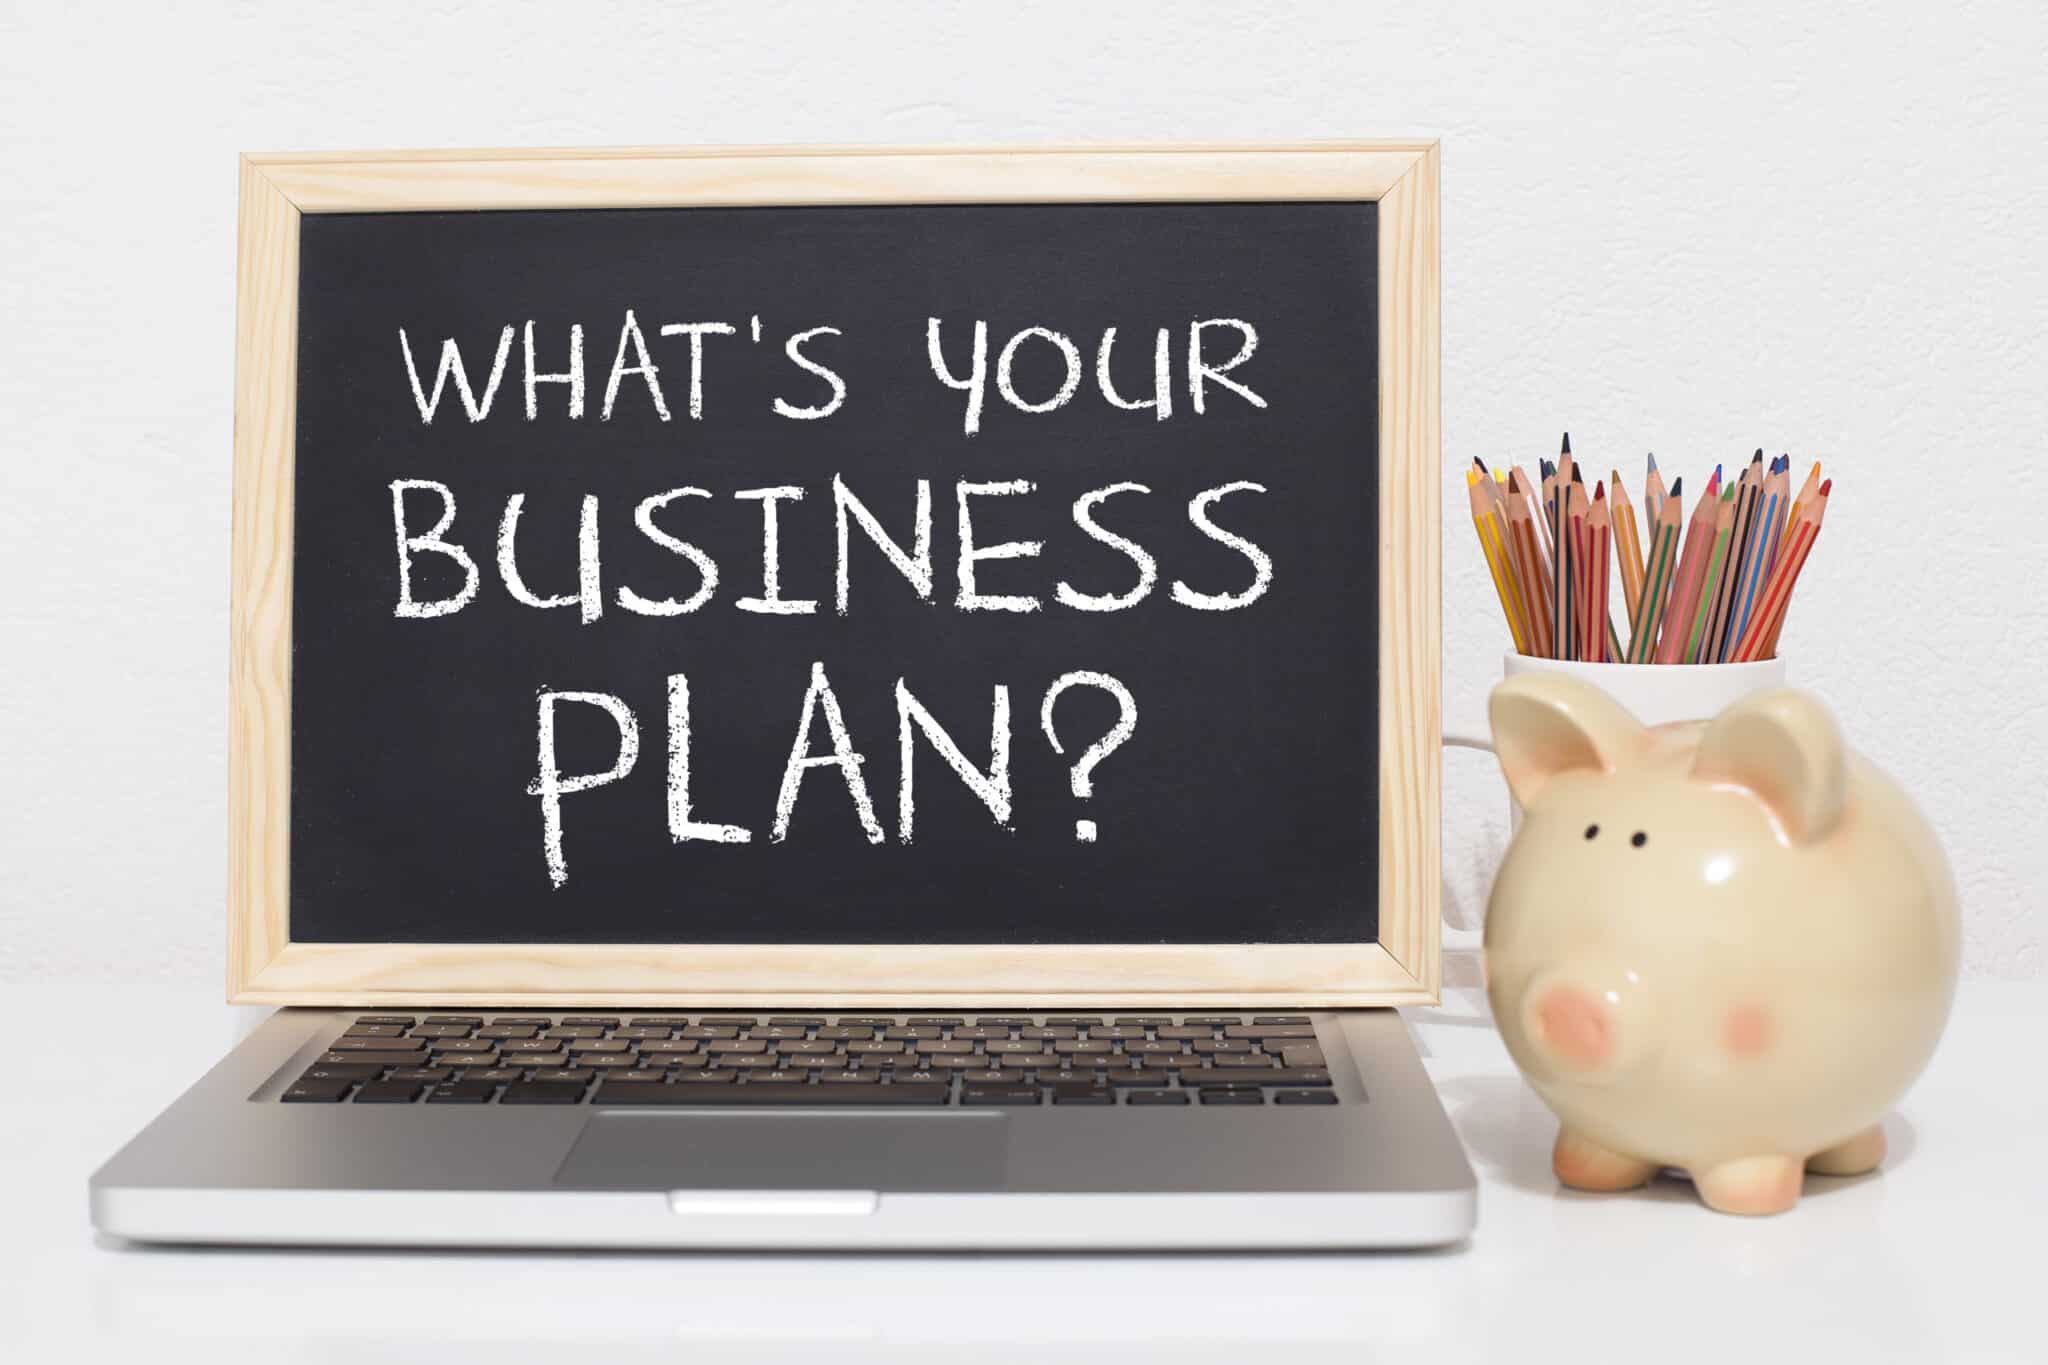 How Hard Is It to Get a Business Loan - Business Plan